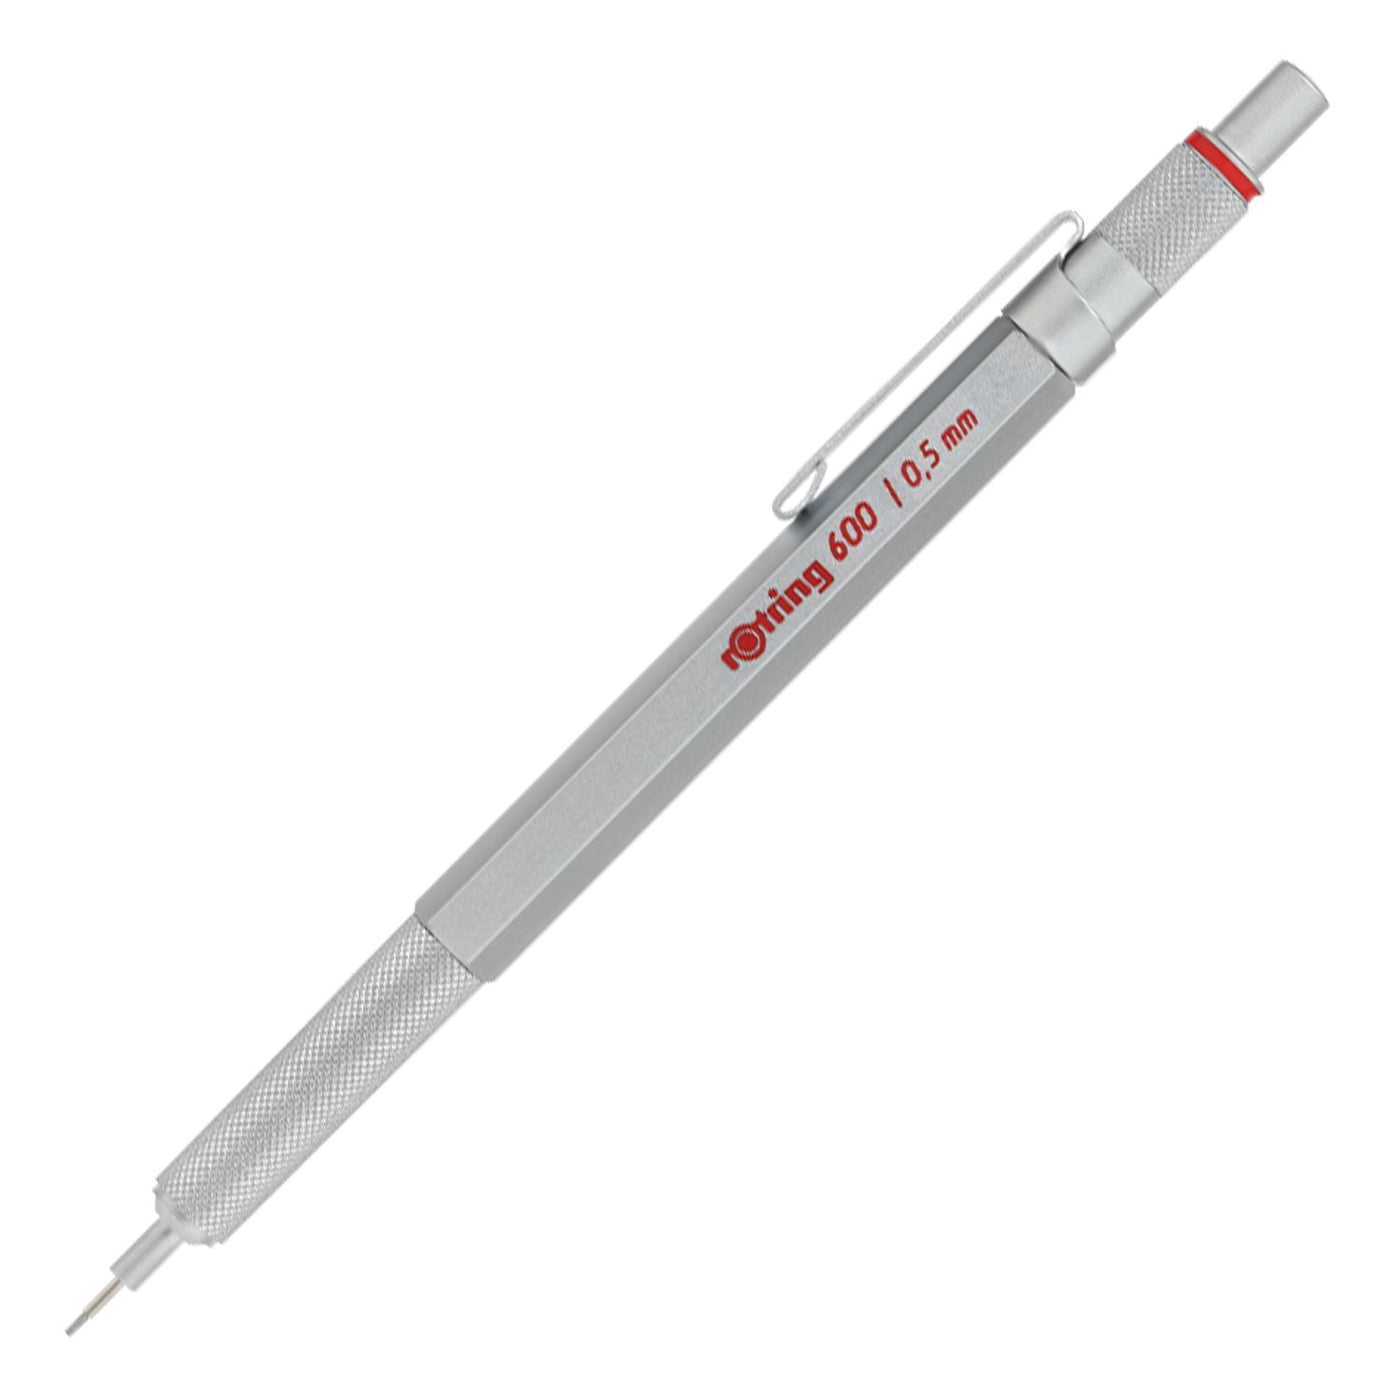 Rotring 600 0.5mm Mechanical Pencil - Silver 1